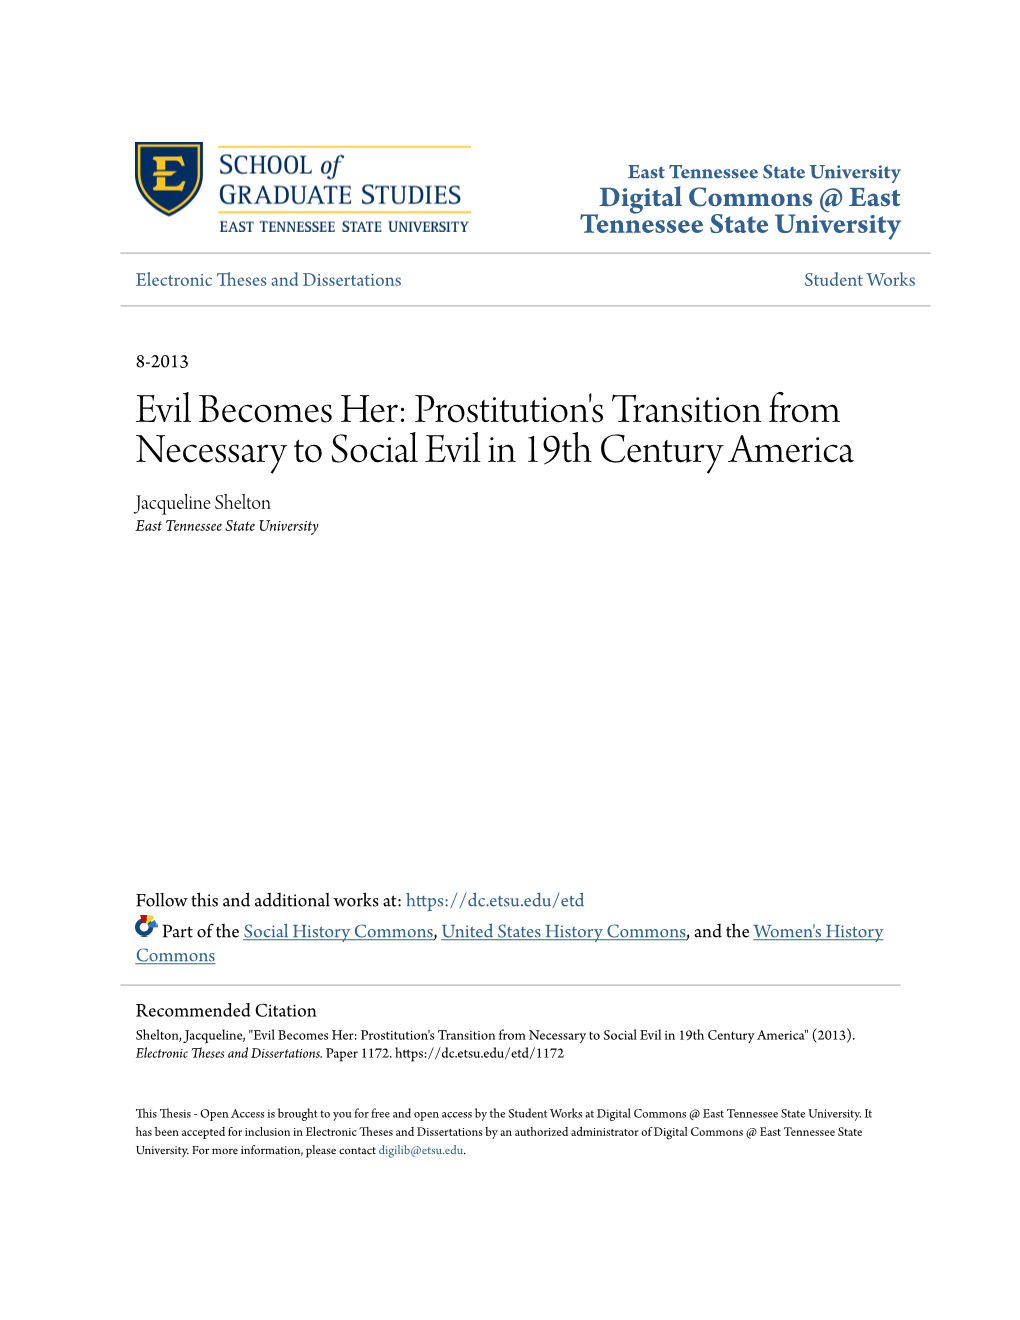 Prostitution's Transition from Necessary to Social Evil in 19Th Century America Jacqueline Shelton East Tennessee State University